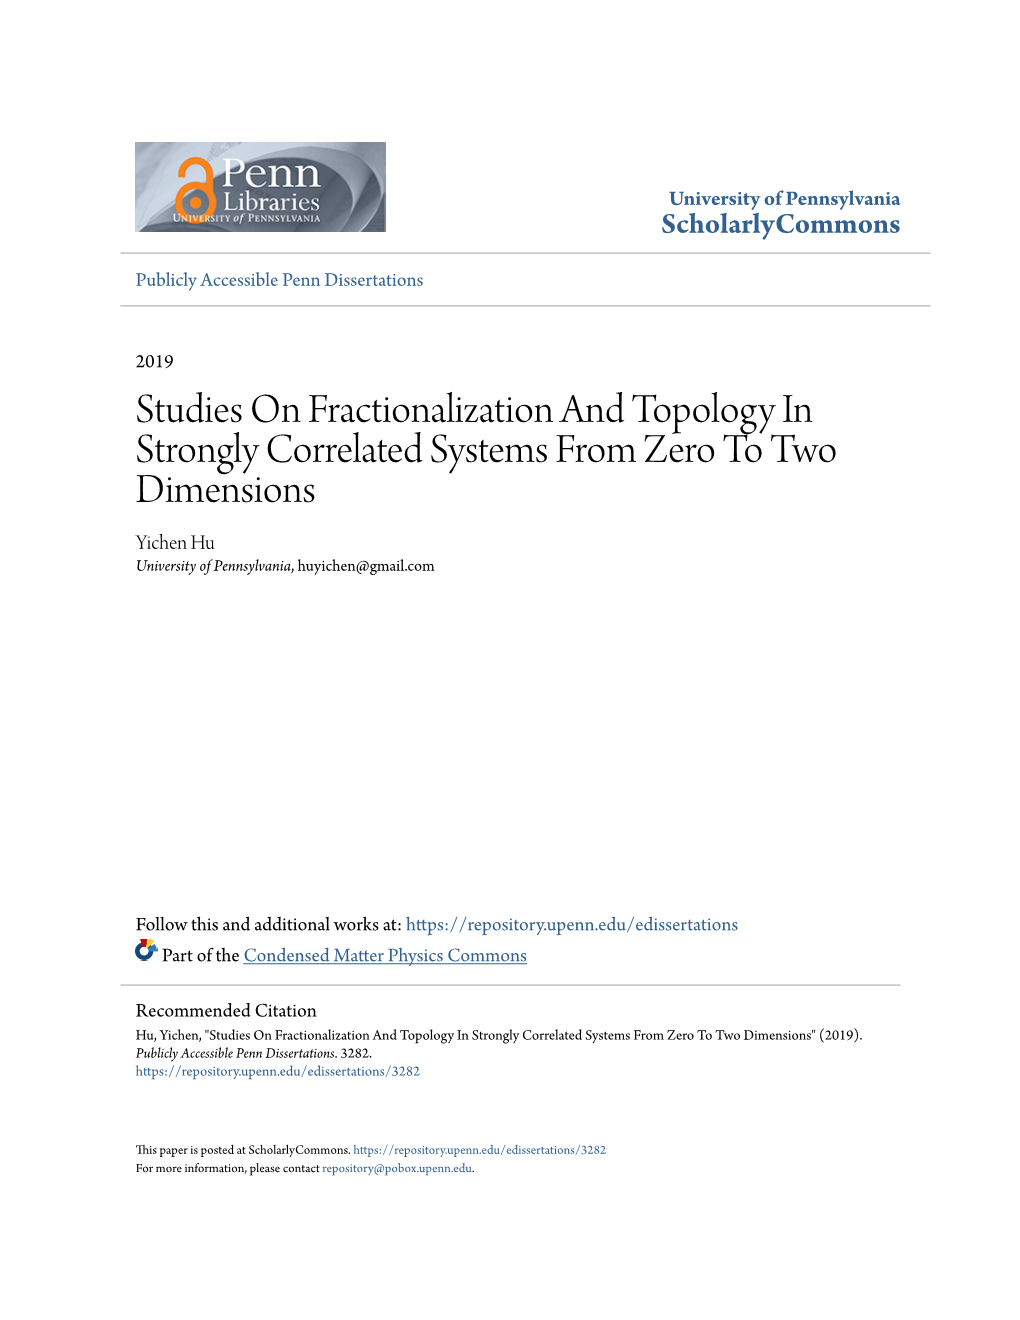 Studies on Fractionalization and Topology in Strongly Correlated Systems from Zero to Two Dimensions Yichen Hu University of Pennsylvania, Huyichen@Gmail.Com